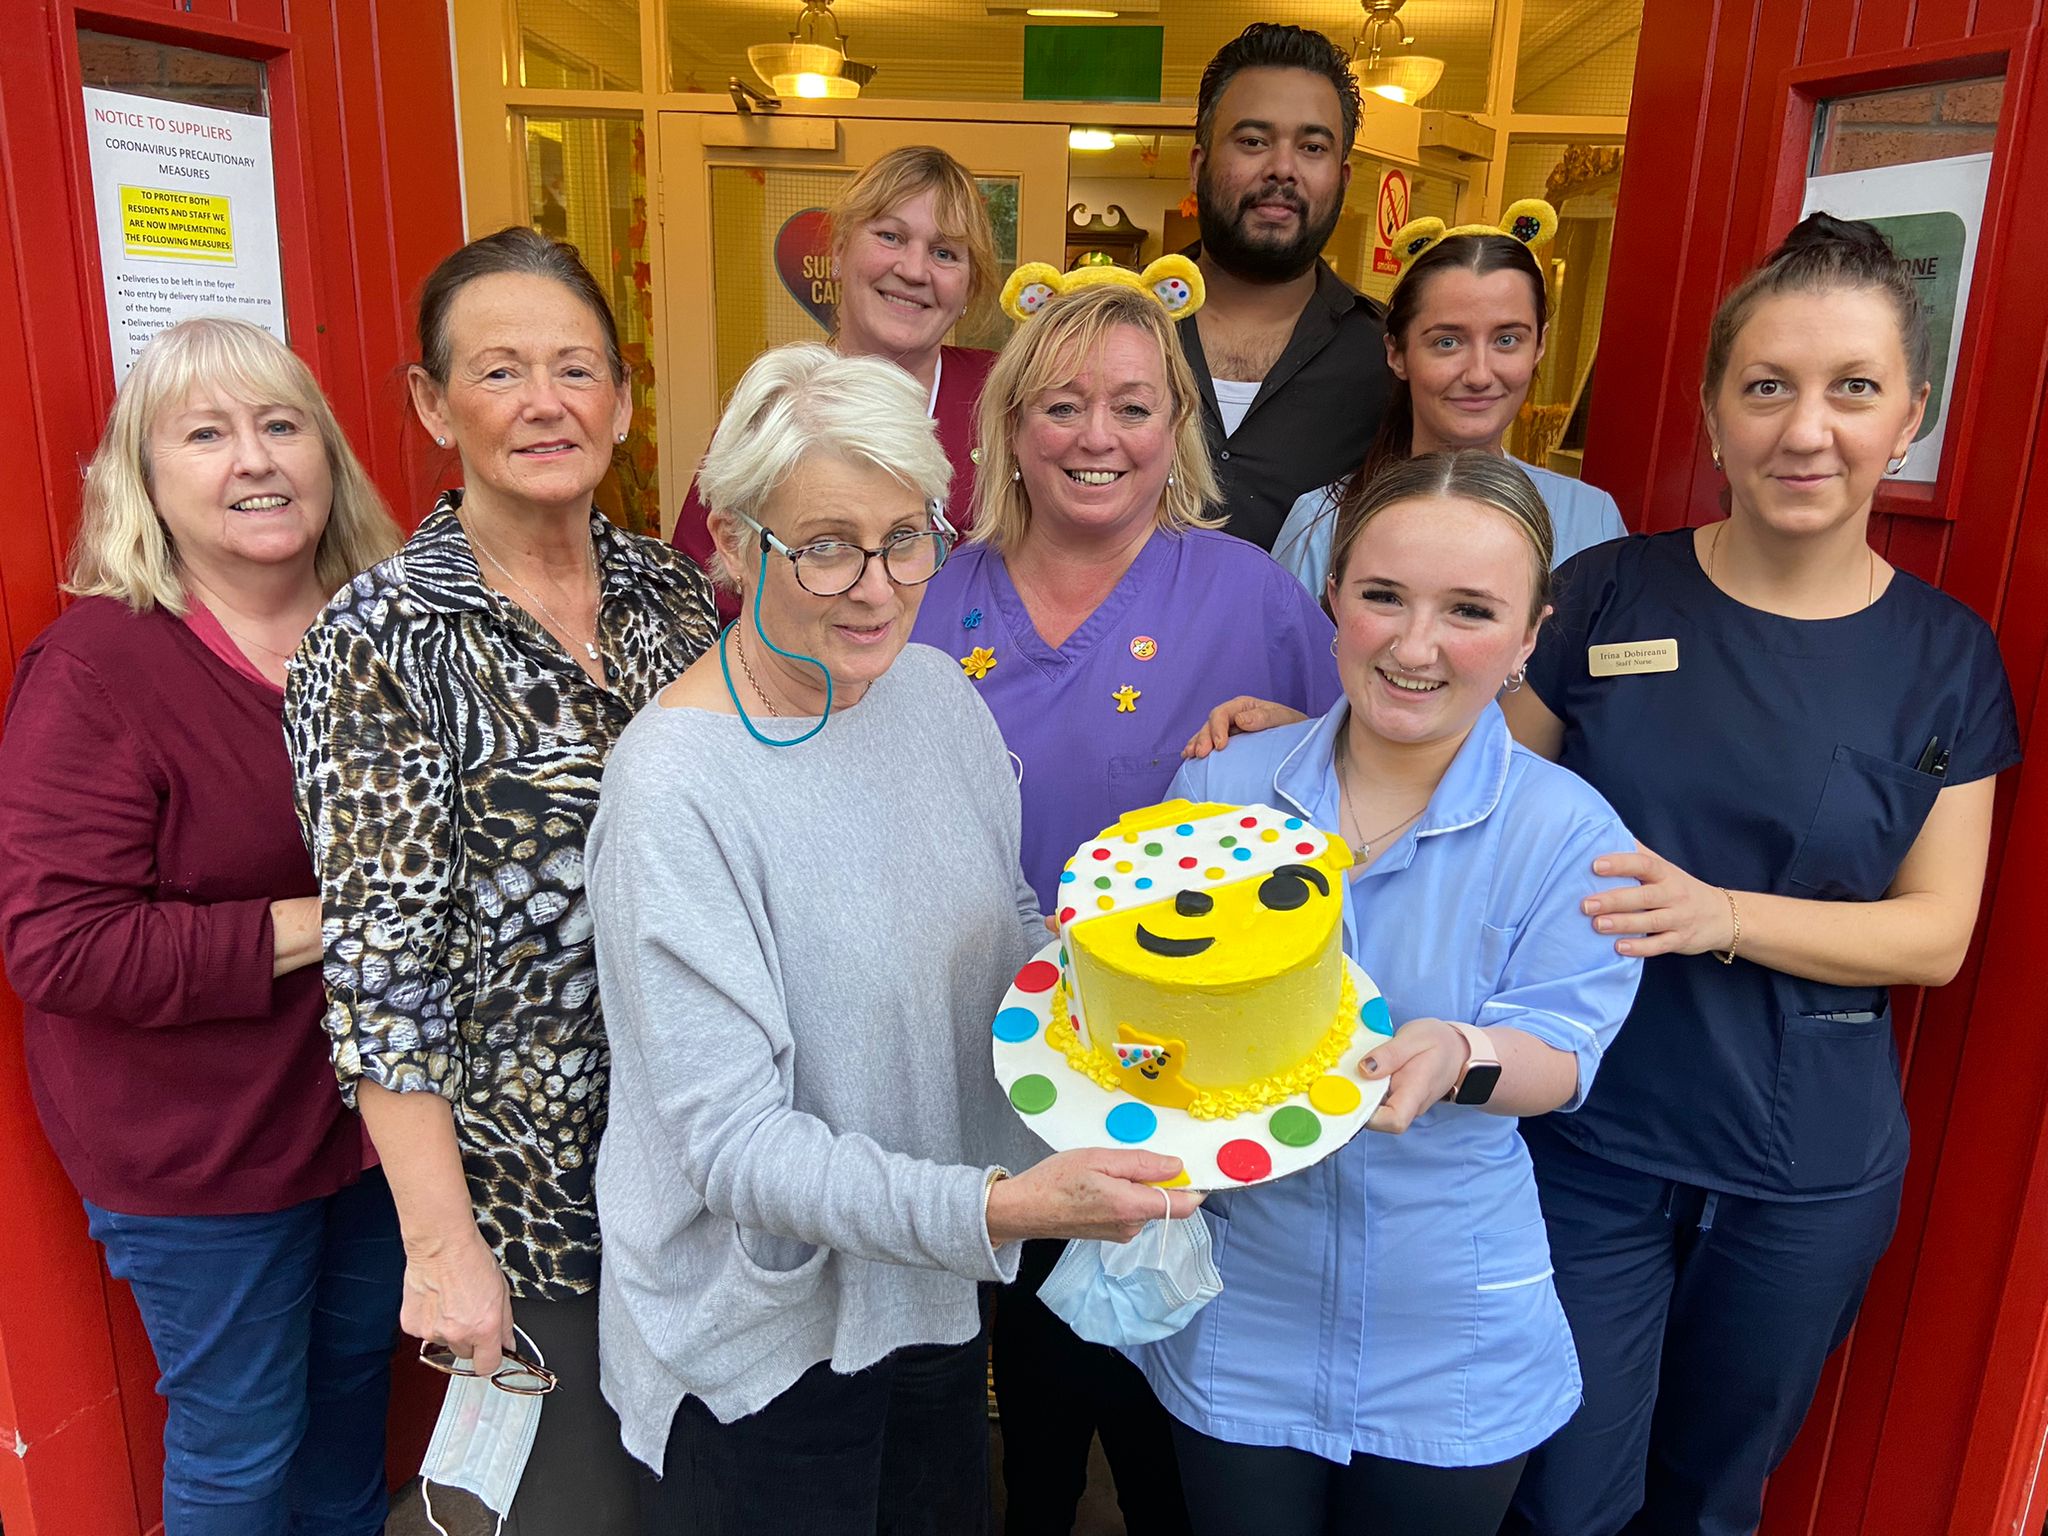 POUNDS FOR PUDSEY: Staff and families at Fruithill Nursing Home raised over £250 by performing the slush at an afternoon tea for Children in Need